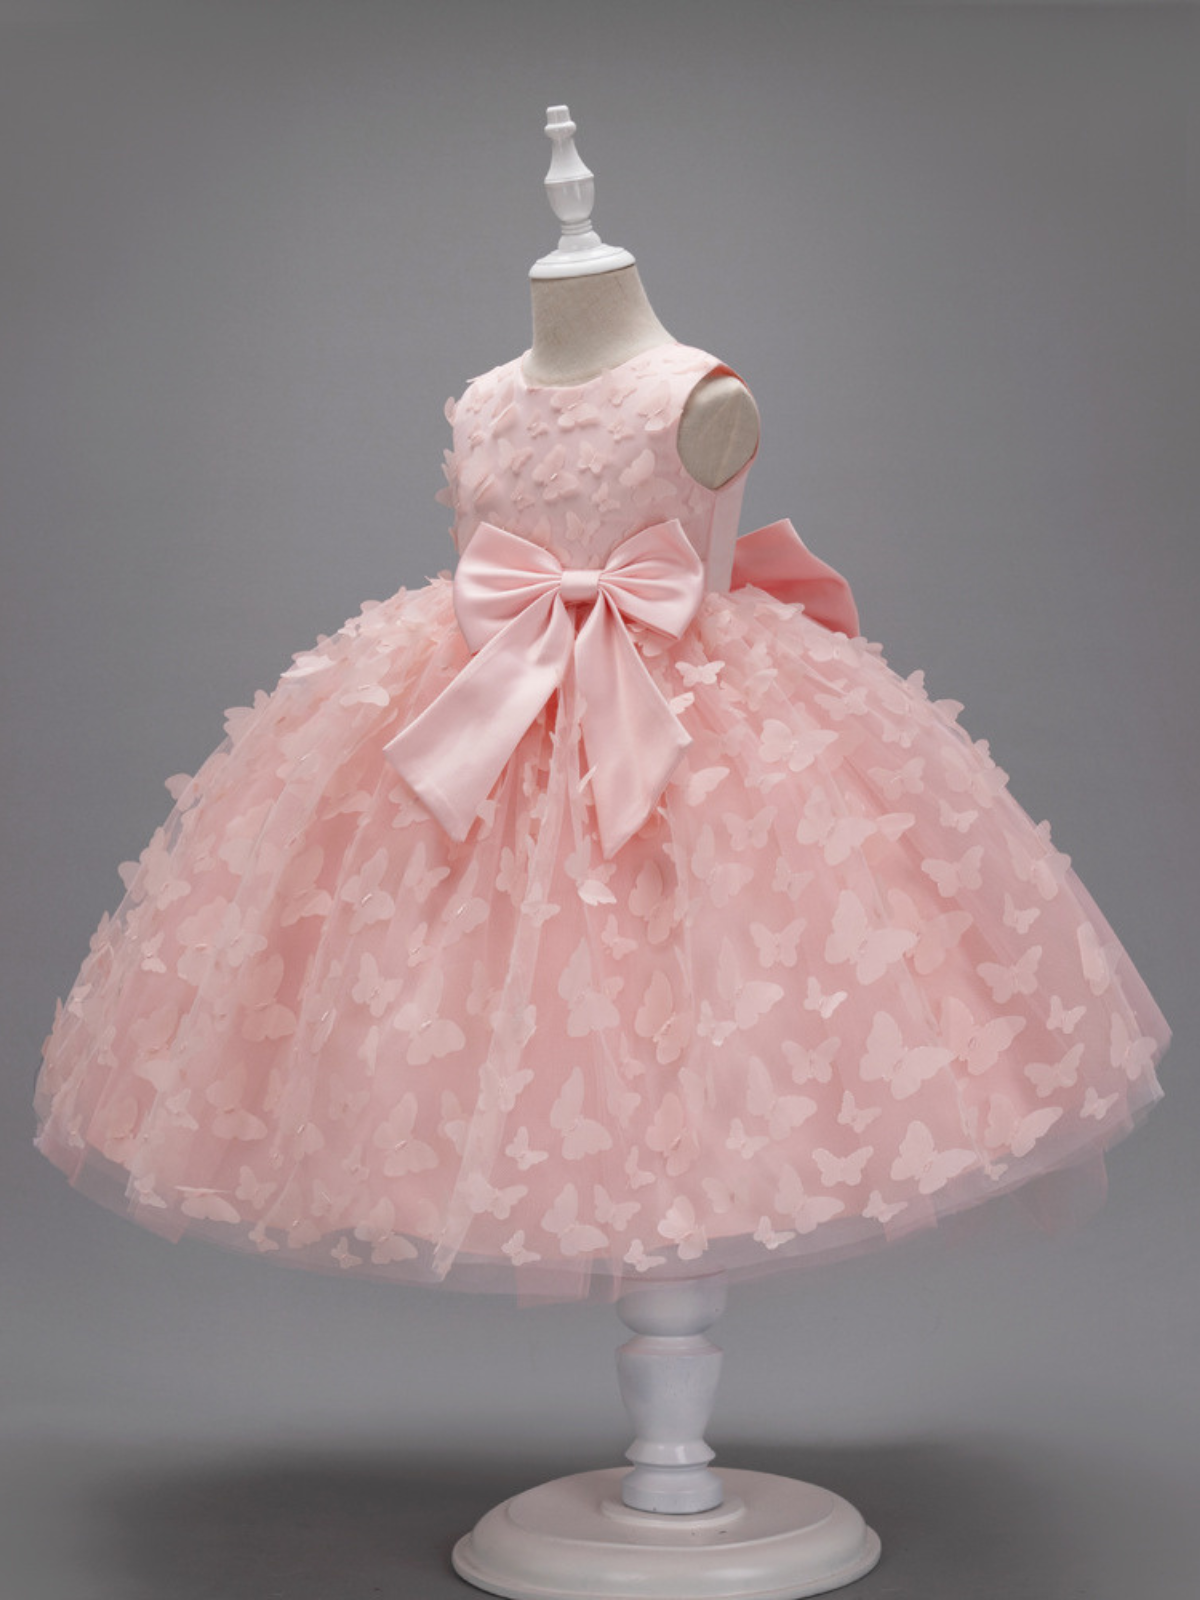 Girls Formal Easter Dresses | Butterfly Embroidered Tulle Tutu Dress ...